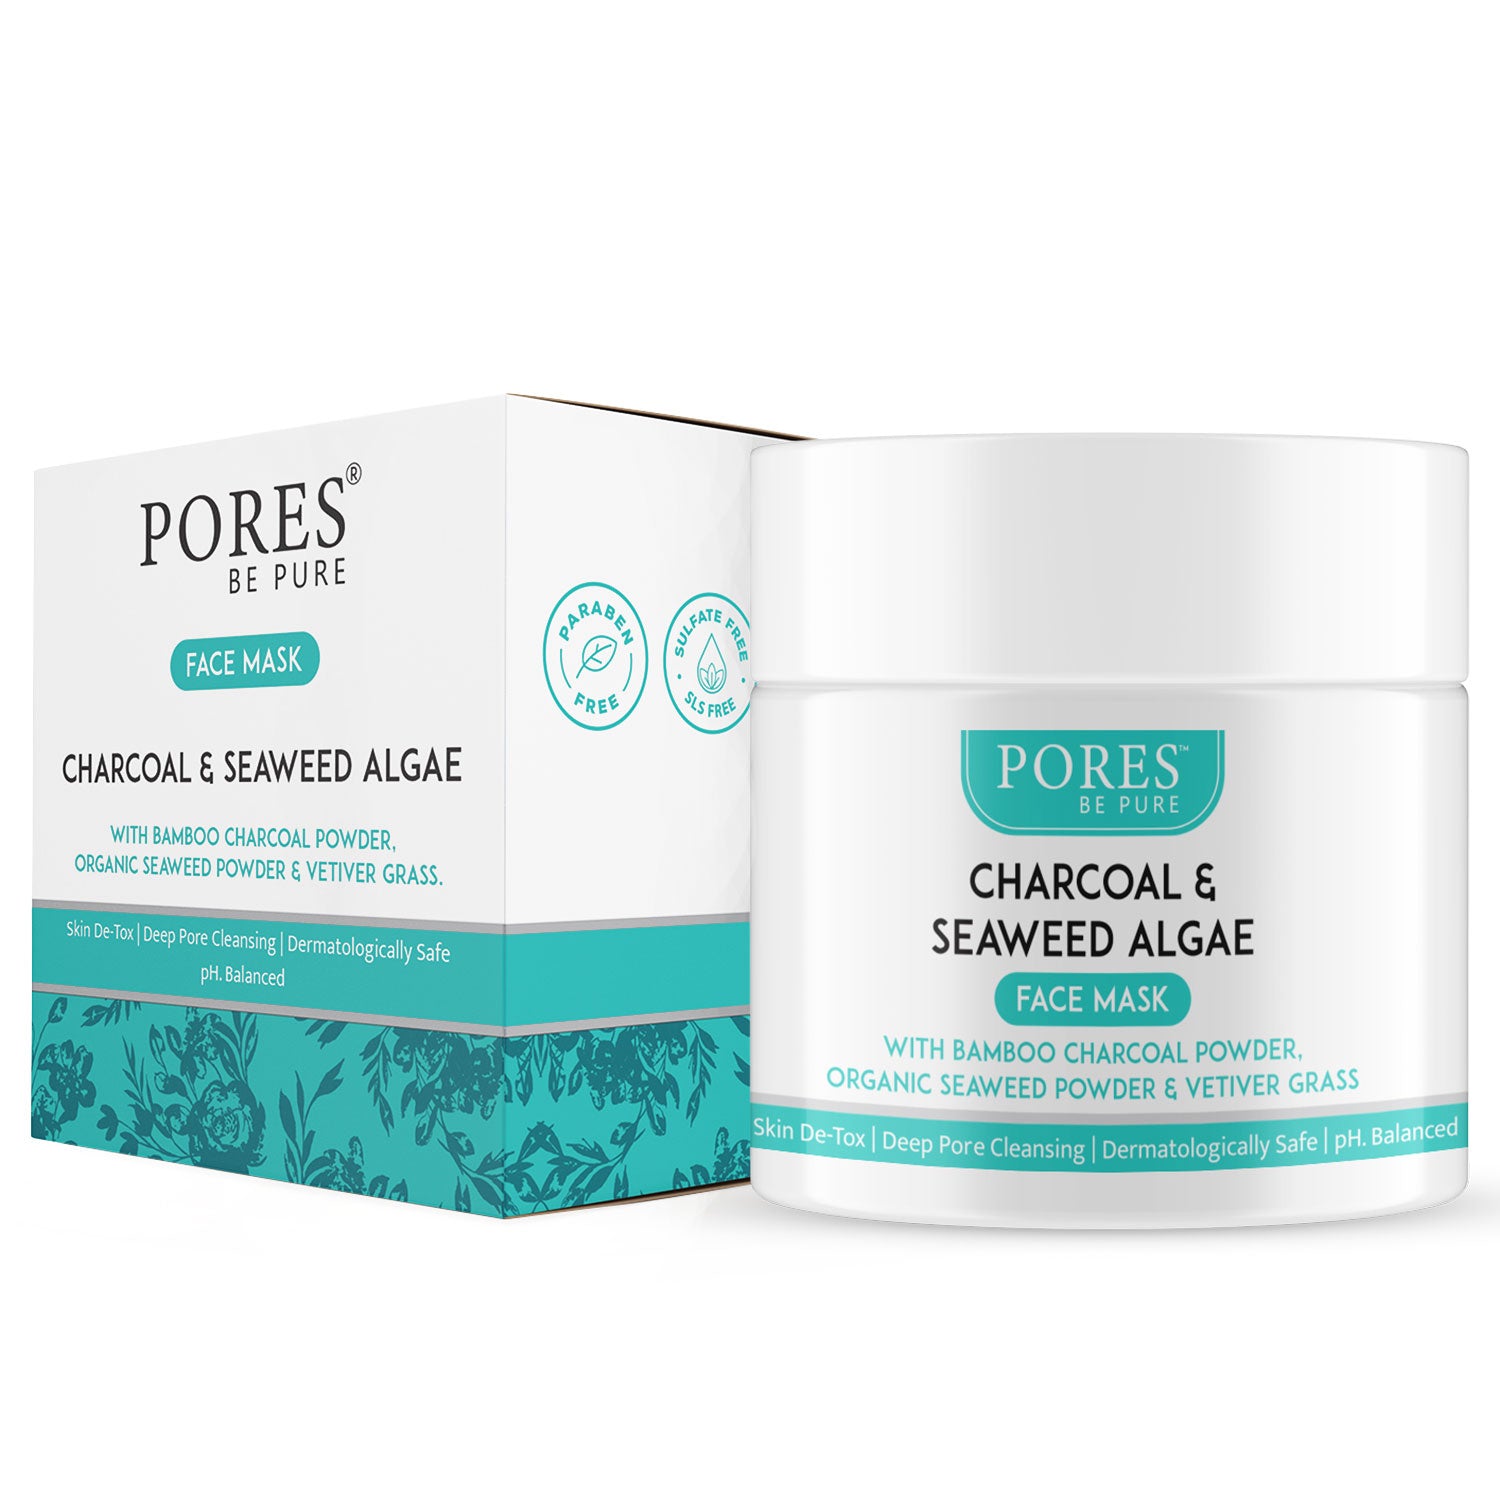 PORES BE PURE Charcoal and Seaweed Algae Face Mask with Packet